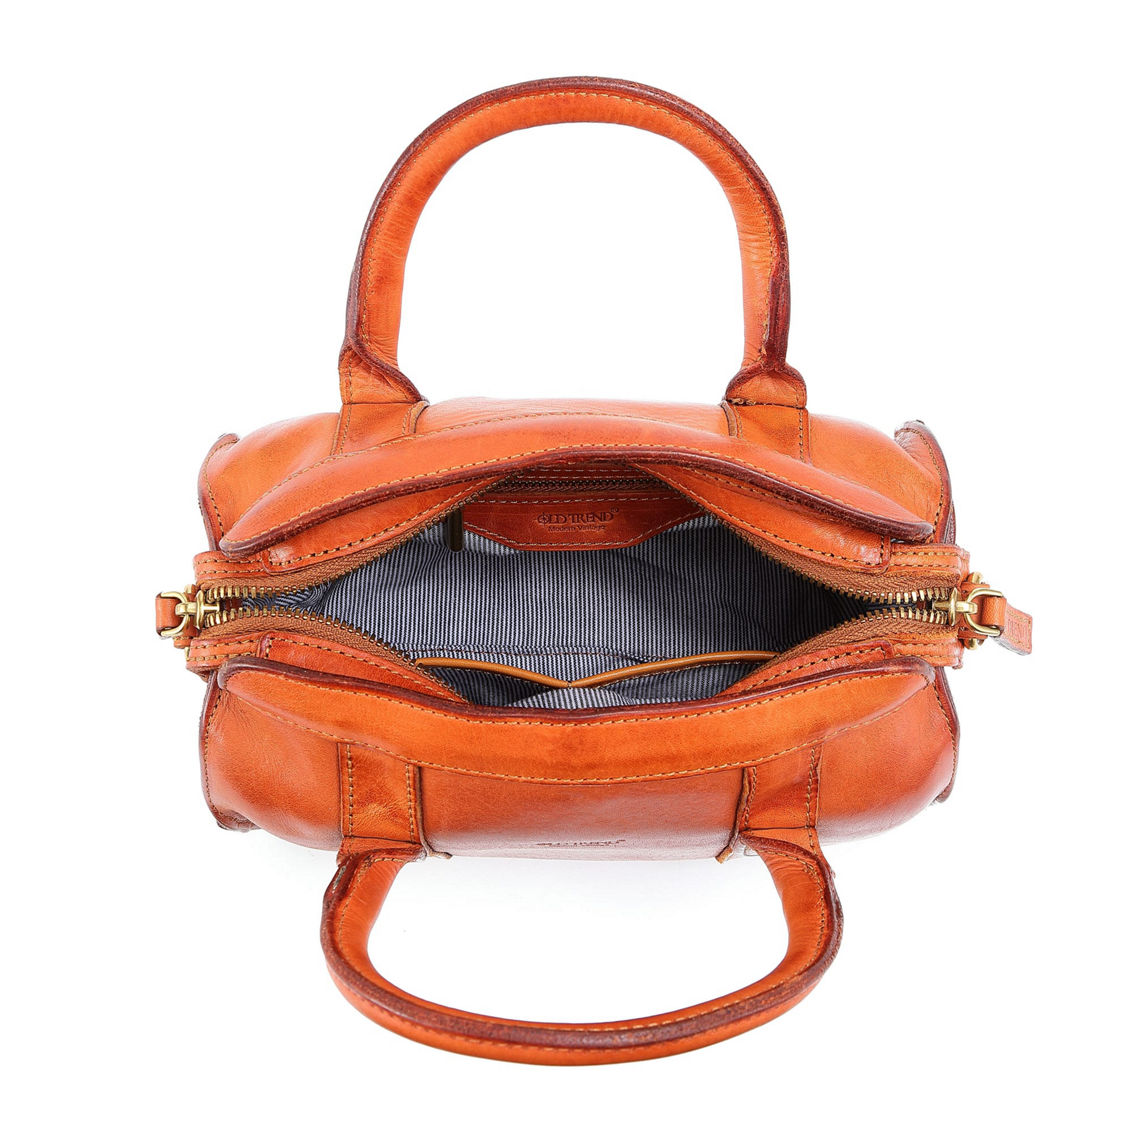 Old Trend Larkspur Leather Crossbody - Image 3 of 5